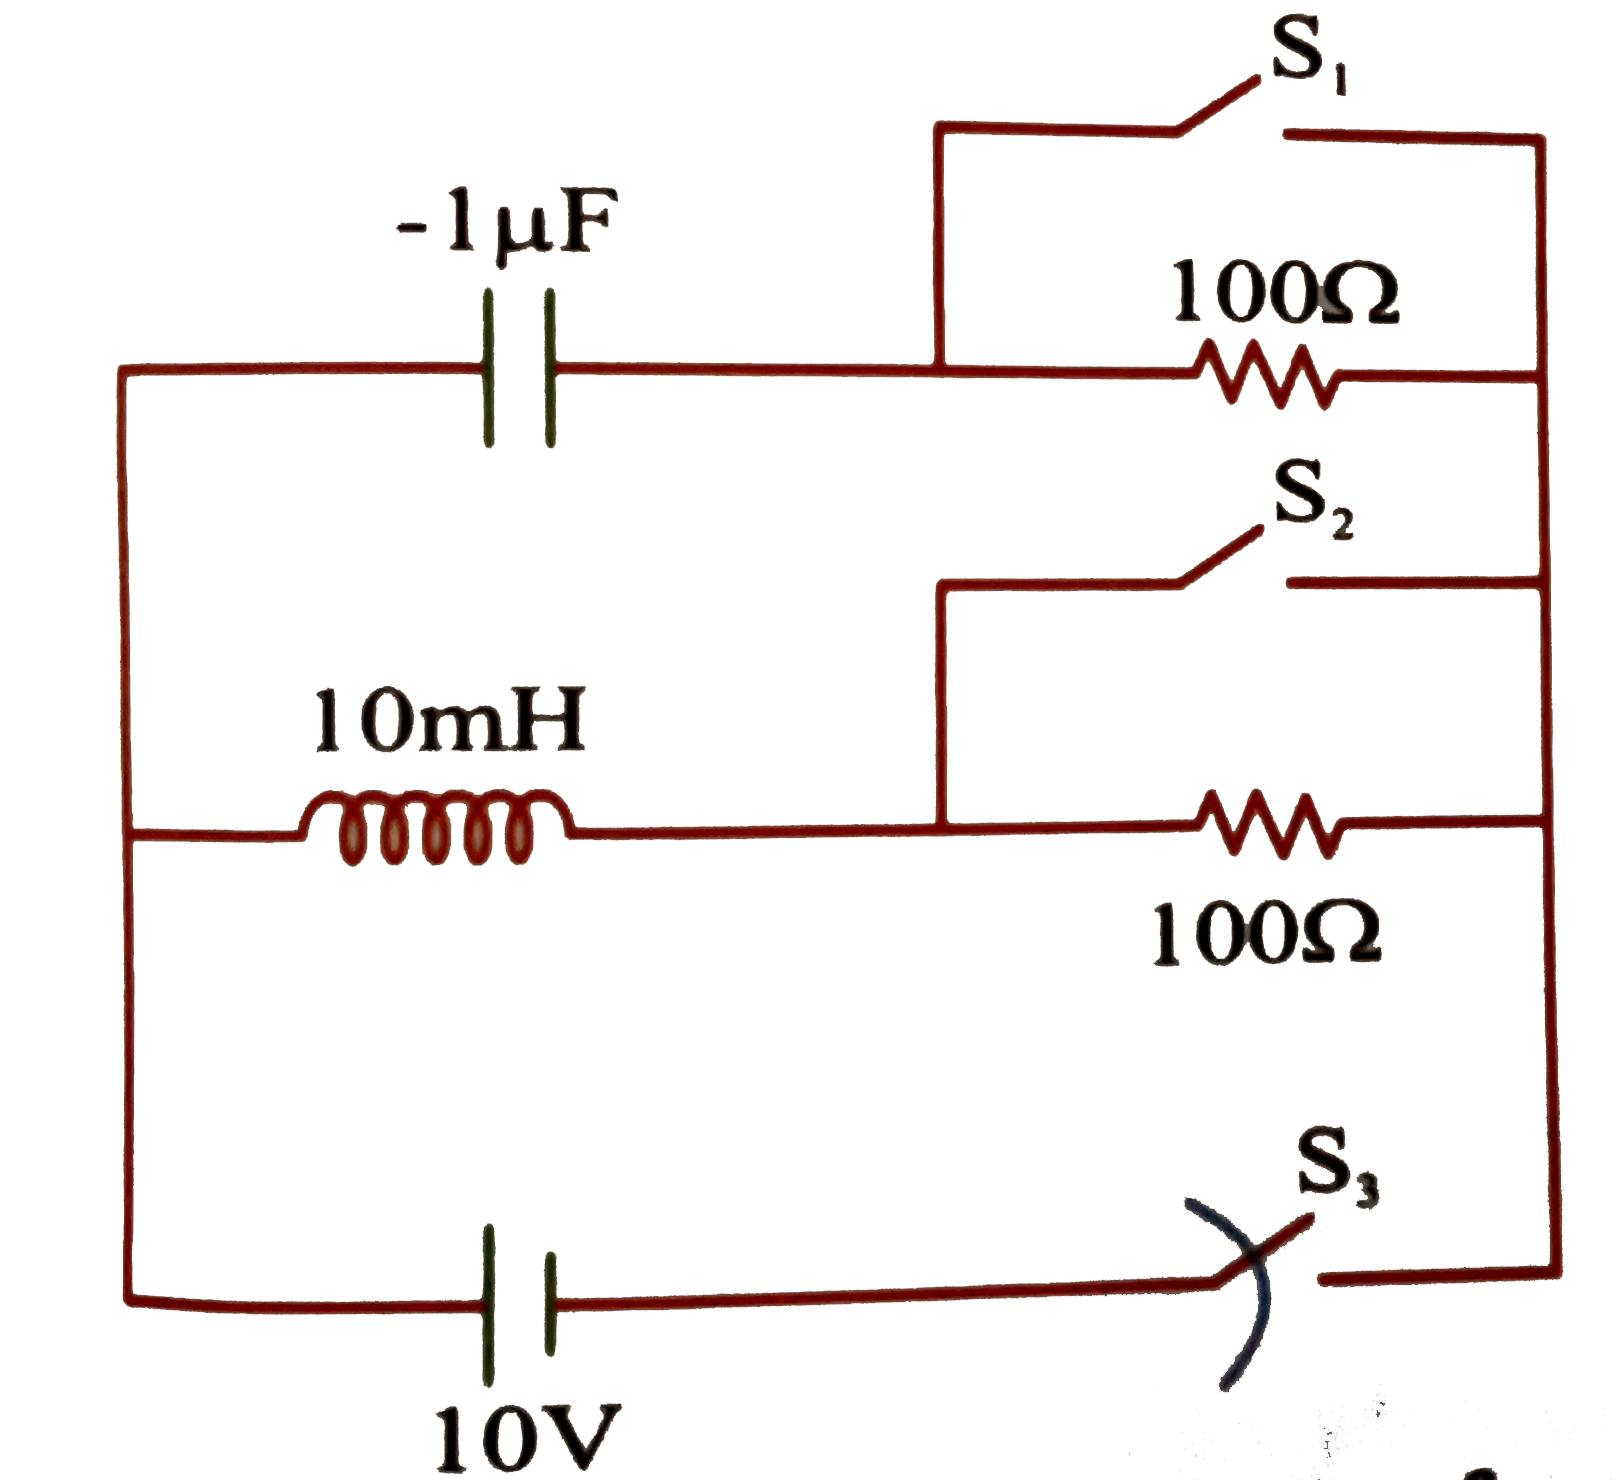 Switches S(1), S(2) remain open and switch S(3) remains closed for long time such that capacitor becomes fully charged and current in inductor coil becomes maximum, Now switches S(1), S(2) are simultaneously closed andS(3) in simultaneously opened at t=0   Assume that battery and inductor coil are ideal      Charge (in mu C) on capacitor as a function of time is :